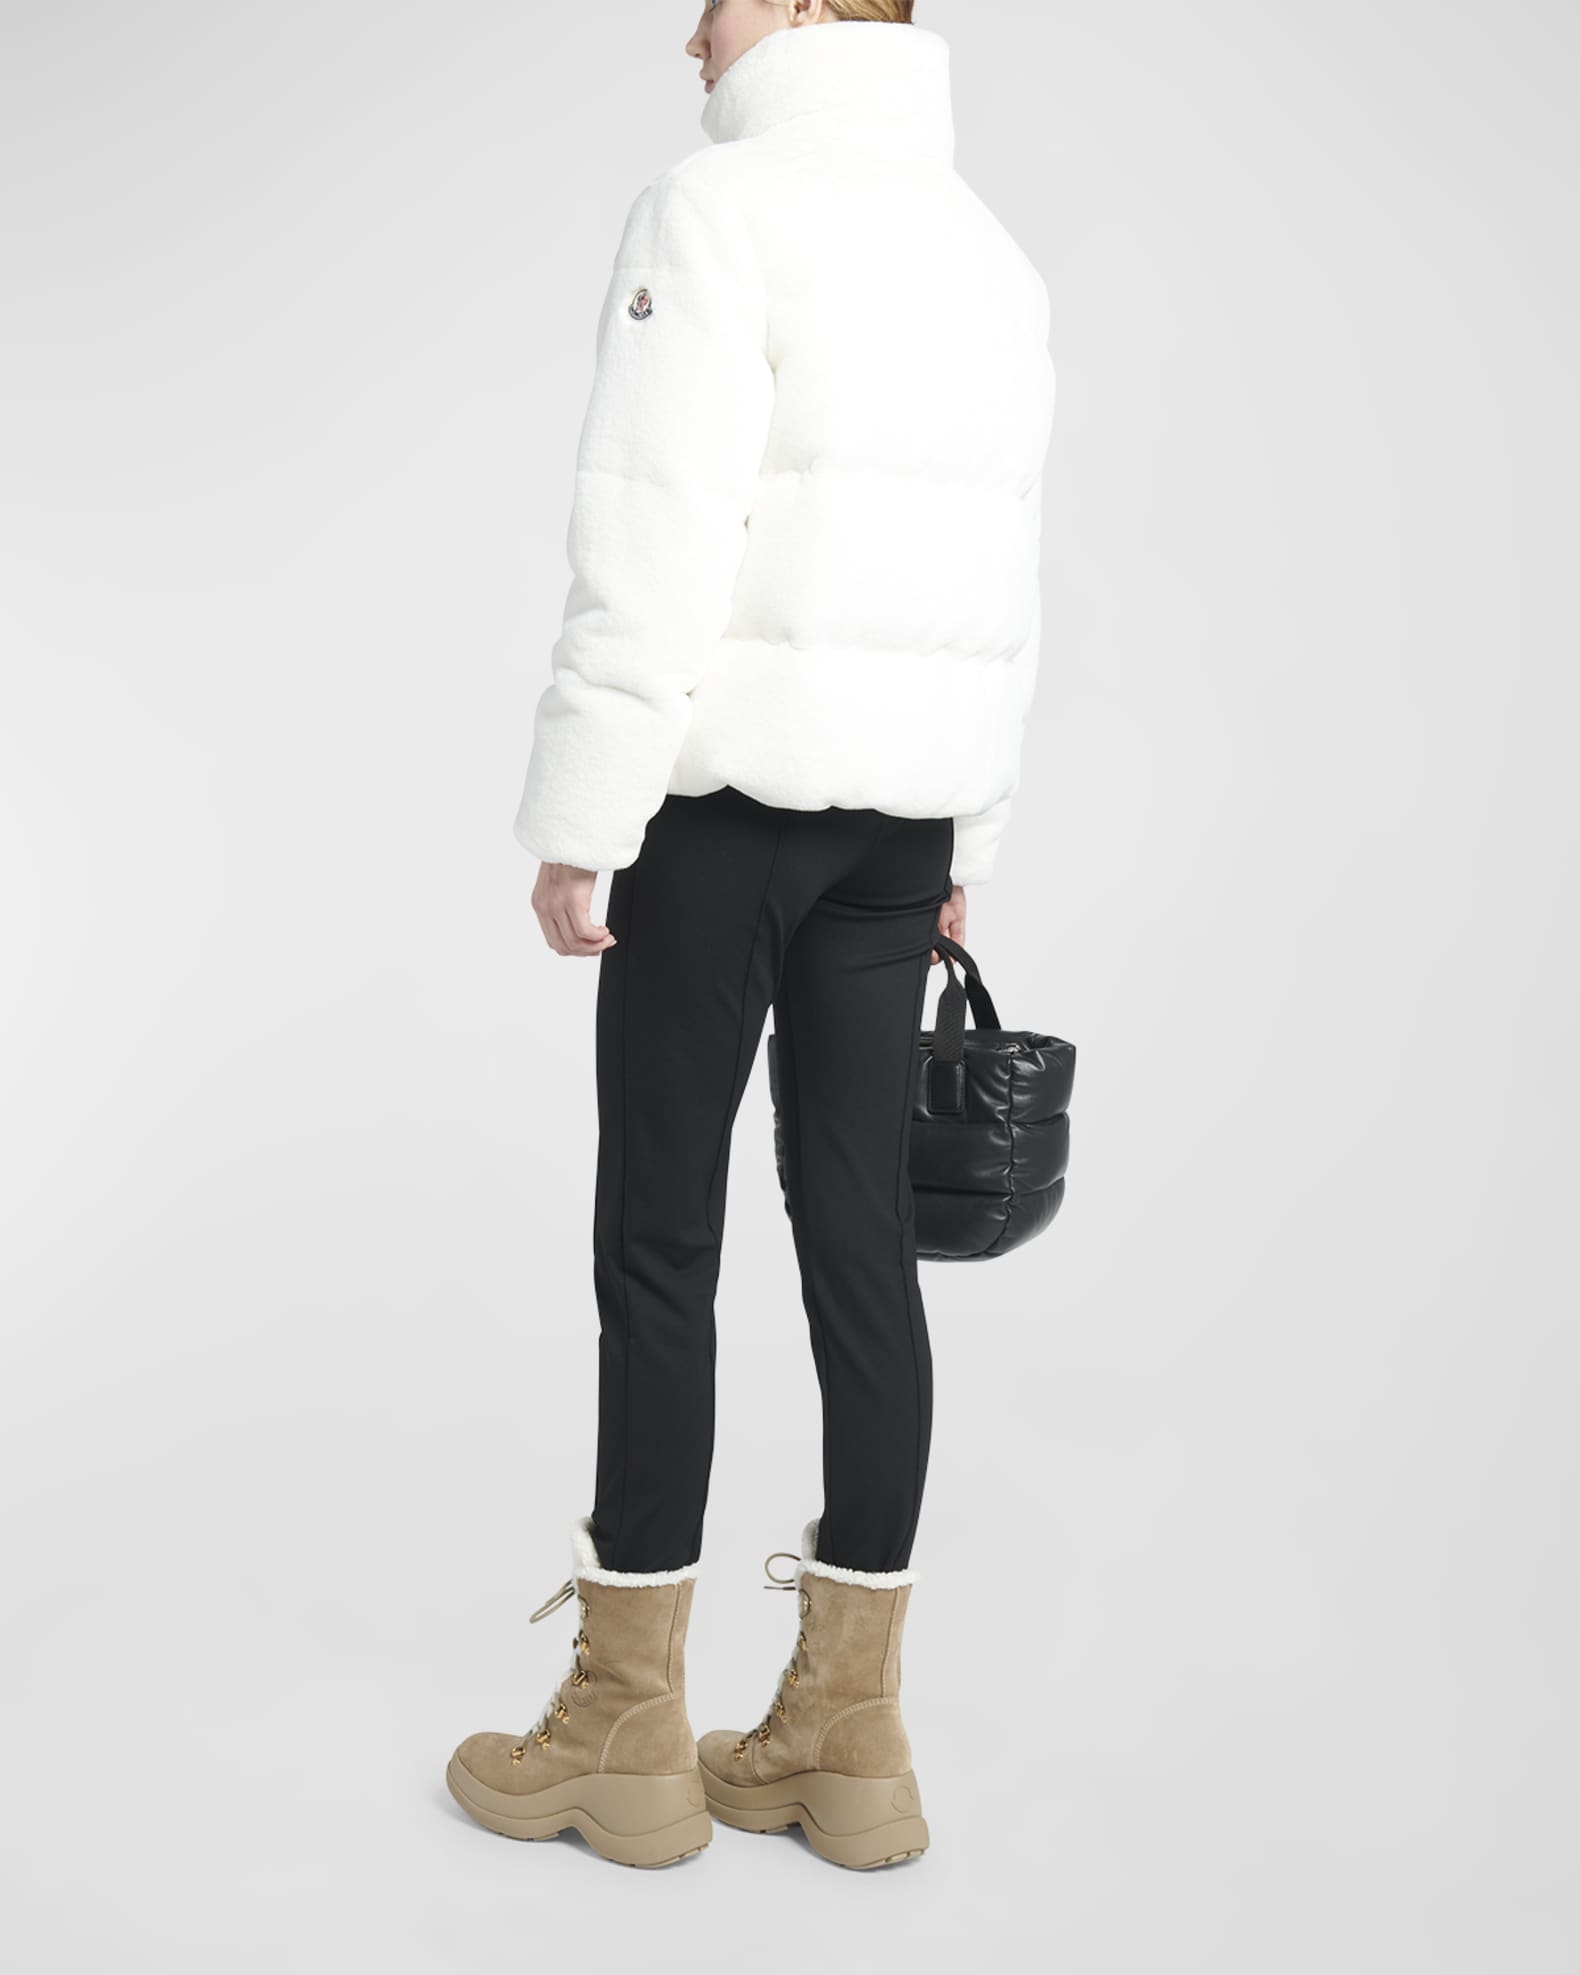 Moncler Pluvier Fuzzy Puffer Jacket | Neiman Marcus